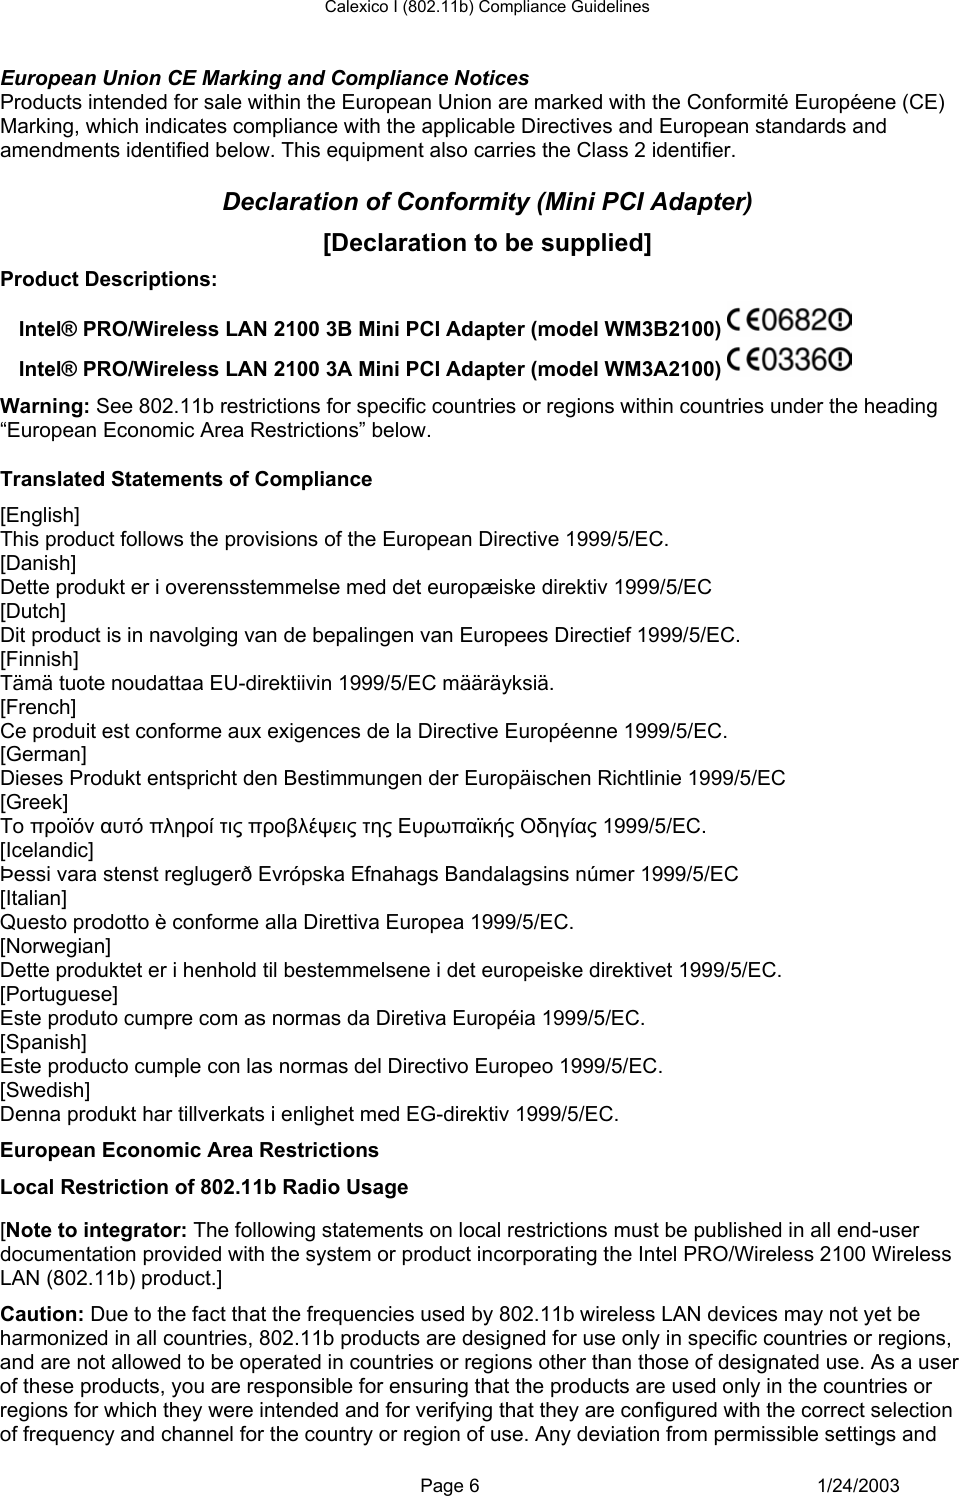 Calexico I (802.11b) Compliance Guidelines  European Union CE Marking and Compliance Notices Products intended for sale within the European Union are marked with the Conformité Européene (CE) Marking, which indicates compliance with the applicable Directives and European standards and amendments identified below. This equipment also carries the Class 2 identifier.  Declaration of Conformity (Mini PCI Adapter) [Declaration to be supplied] Product Descriptions:  Intel® PRO/Wireless LAN 2100 3B Mini PCI Adapter (model WM3B2100)   Intel® PRO/Wireless LAN 2100 3A Mini PCI Adapter (model WM3A2100)   Warning: See 802.11b restrictions for specific countries or regions within countries under the heading “European Economic Area Restrictions” below.  Translated Statements of Compliance [English] This product follows the provisions of the European Directive 1999/5/EC. [Danish] Dette produkt er i overensstemmelse med det europæiske direktiv 1999/5/EC [Dutch] Dit product is in navolging van de bepalingen van Europees Directief 1999/5/EC. [Finnish] Tämä tuote noudattaa EU-direktiivin 1999/5/EC määräyksiä. [French] Ce produit est conforme aux exigences de la Directive Européenne 1999/5/EC. [German] Dieses Produkt entspricht den Bestimmungen der Europäischen Richtlinie 1999/5/EC [Greek] Το προϊόν αυτό πληροί τις προβλέψεις της Ευρωπαϊκής Οδηγίας 1999/5/ΕC. [Icelandic] Þessi vara stenst reglugerð Evrópska Efnahags Bandalagsins númer 1999/5/EC [Italian] Questo prodotto è conforme alla Direttiva Europea 1999/5/EC. [Norwegian] Dette produktet er i henhold til bestemmelsene i det europeiske direktivet 1999/5/EC. [Portuguese] Este produto cumpre com as normas da Diretiva Européia 1999/5/EC. [Spanish] Este producto cumple con las normas del Directivo Europeo 1999/5/EC. [Swedish] Denna produkt har tillverkats i enlighet med EG-direktiv 1999/5/EC. European Economic Area Restrictions Local Restriction of 802.11b Radio Usage  [Note to integrator: The following statements on local restrictions must be published in all end-user documentation provided with the system or product incorporating the Intel PRO/Wireless 2100 Wireless LAN (802.11b) product.] Caution: Due to the fact that the frequencies used by 802.11b wireless LAN devices may not yet be harmonized in all countries, 802.11b products are designed for use only in specific countries or regions, and are not allowed to be operated in countries or regions other than those of designated use. As a user of these products, you are responsible for ensuring that the products are used only in the countries or regions for which they were intended and for verifying that they are configured with the correct selection of frequency and channel for the country or region of use. Any deviation from permissible settings and  Page 6 1/24/2003 